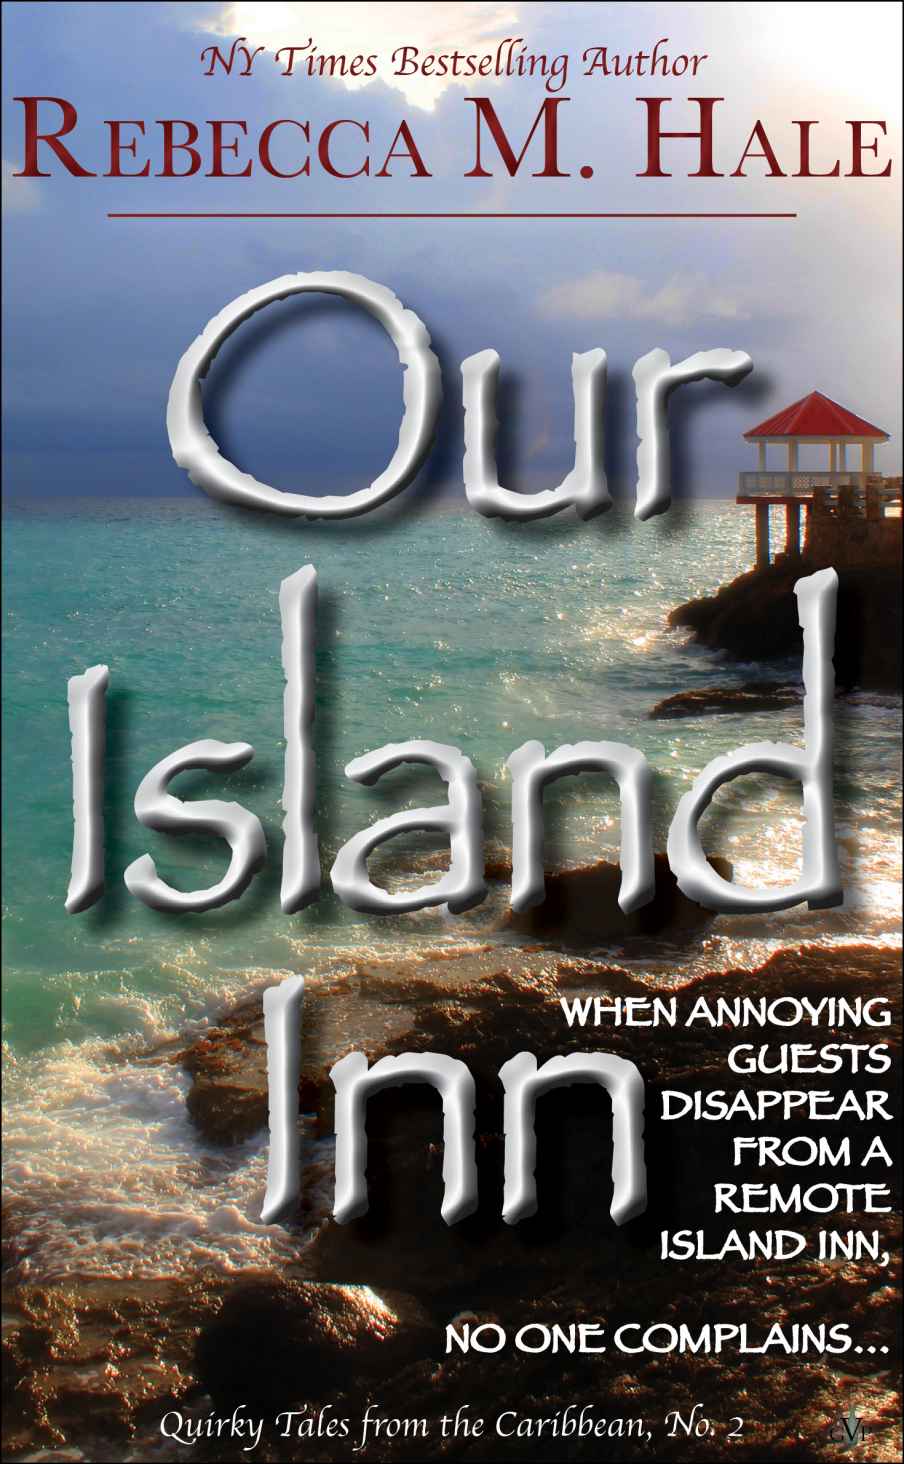 Our Island Inn (Quirky Tales from the Caribbean) by Rebecca M. Hale